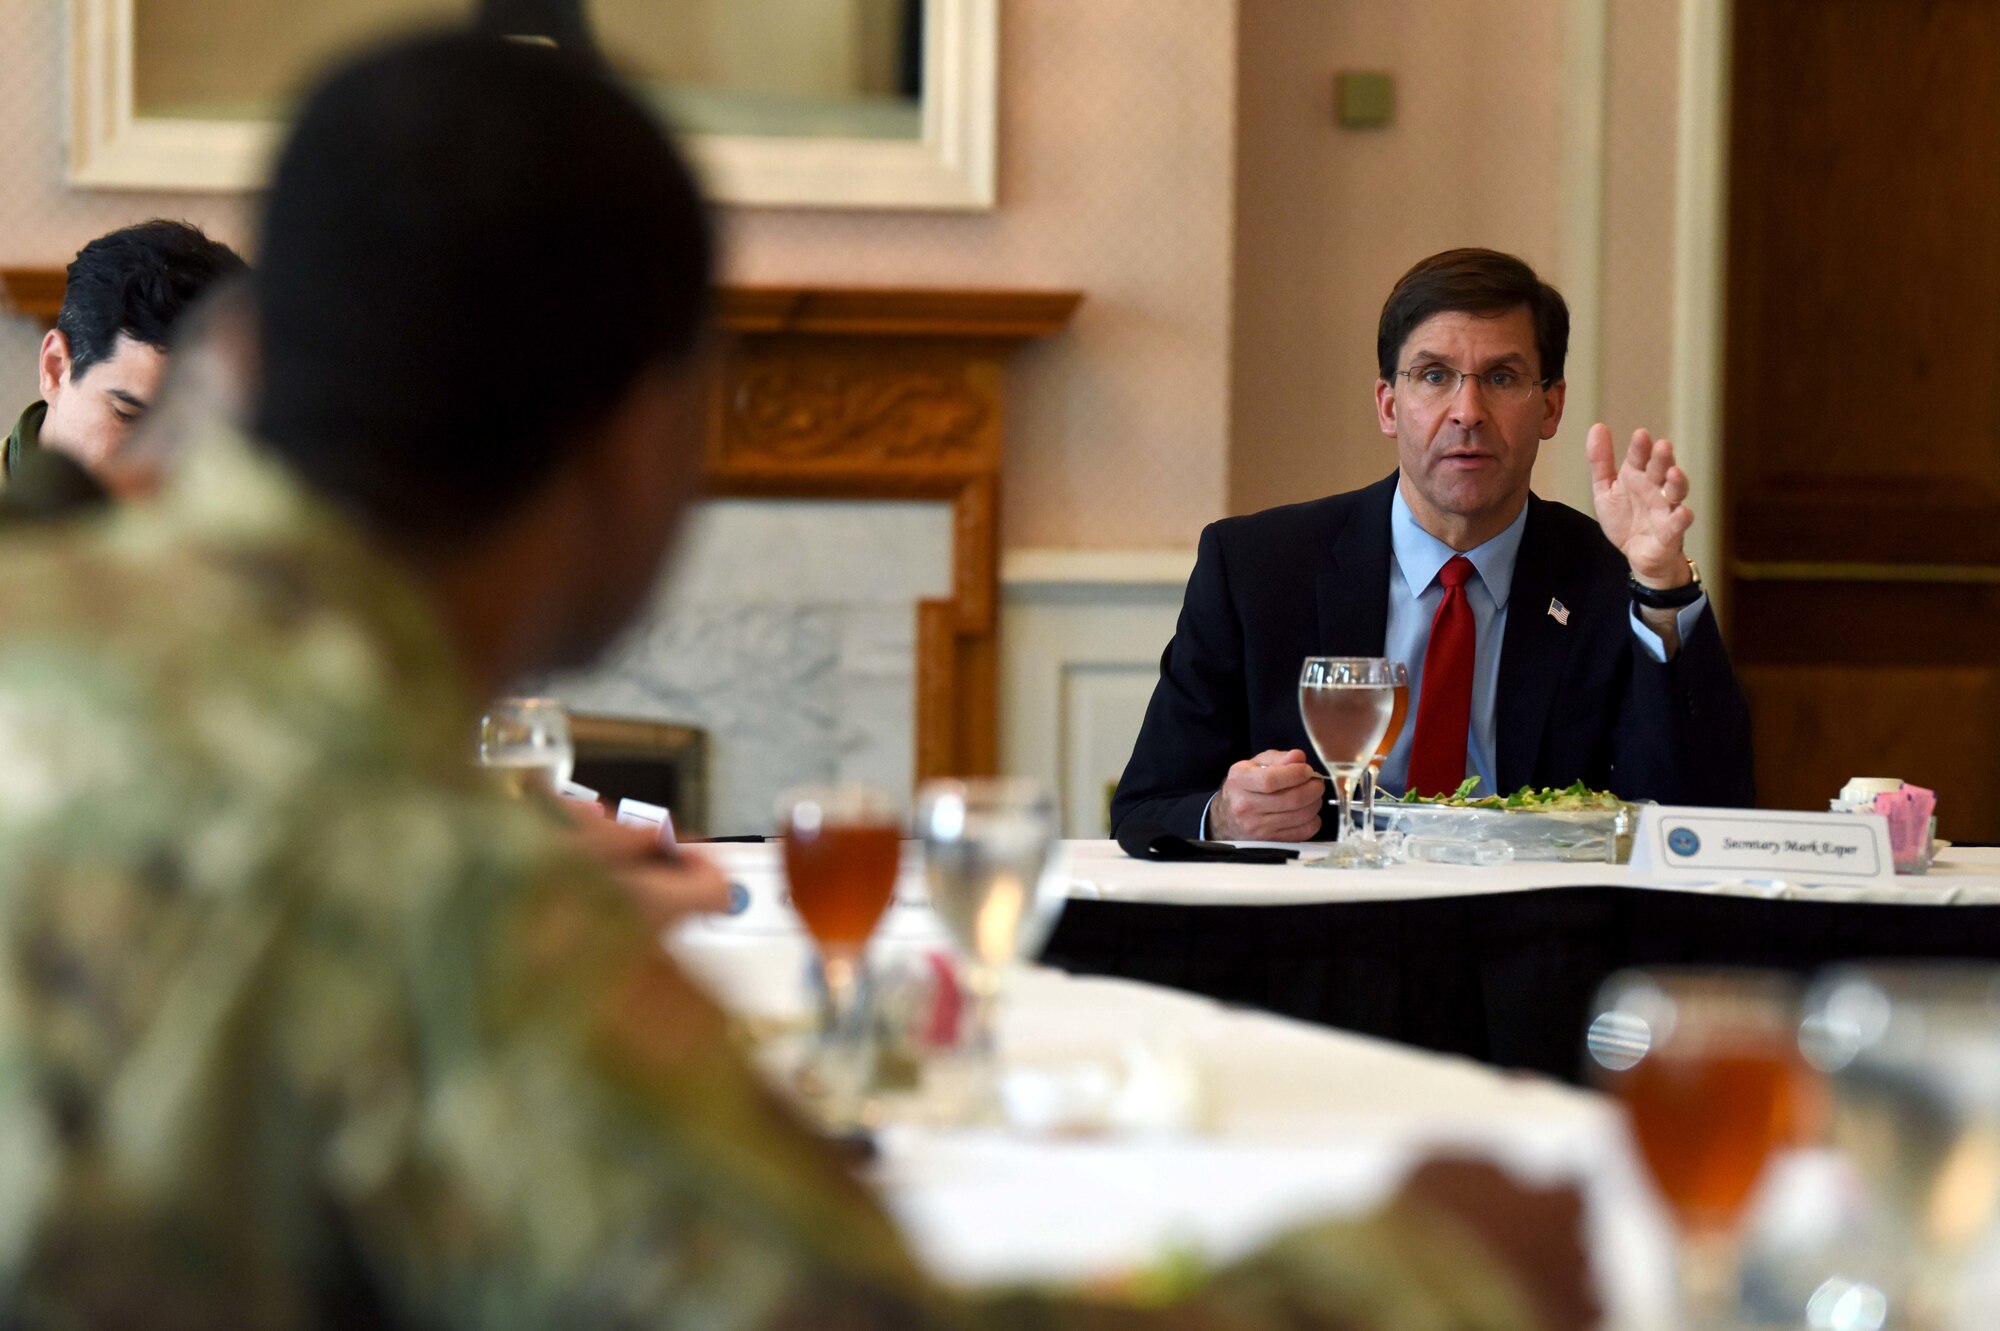 U.S. Secretary of Defense Dr. Mark T. Esper speaks during a lunch with Airmen at RAF Mildenhall.